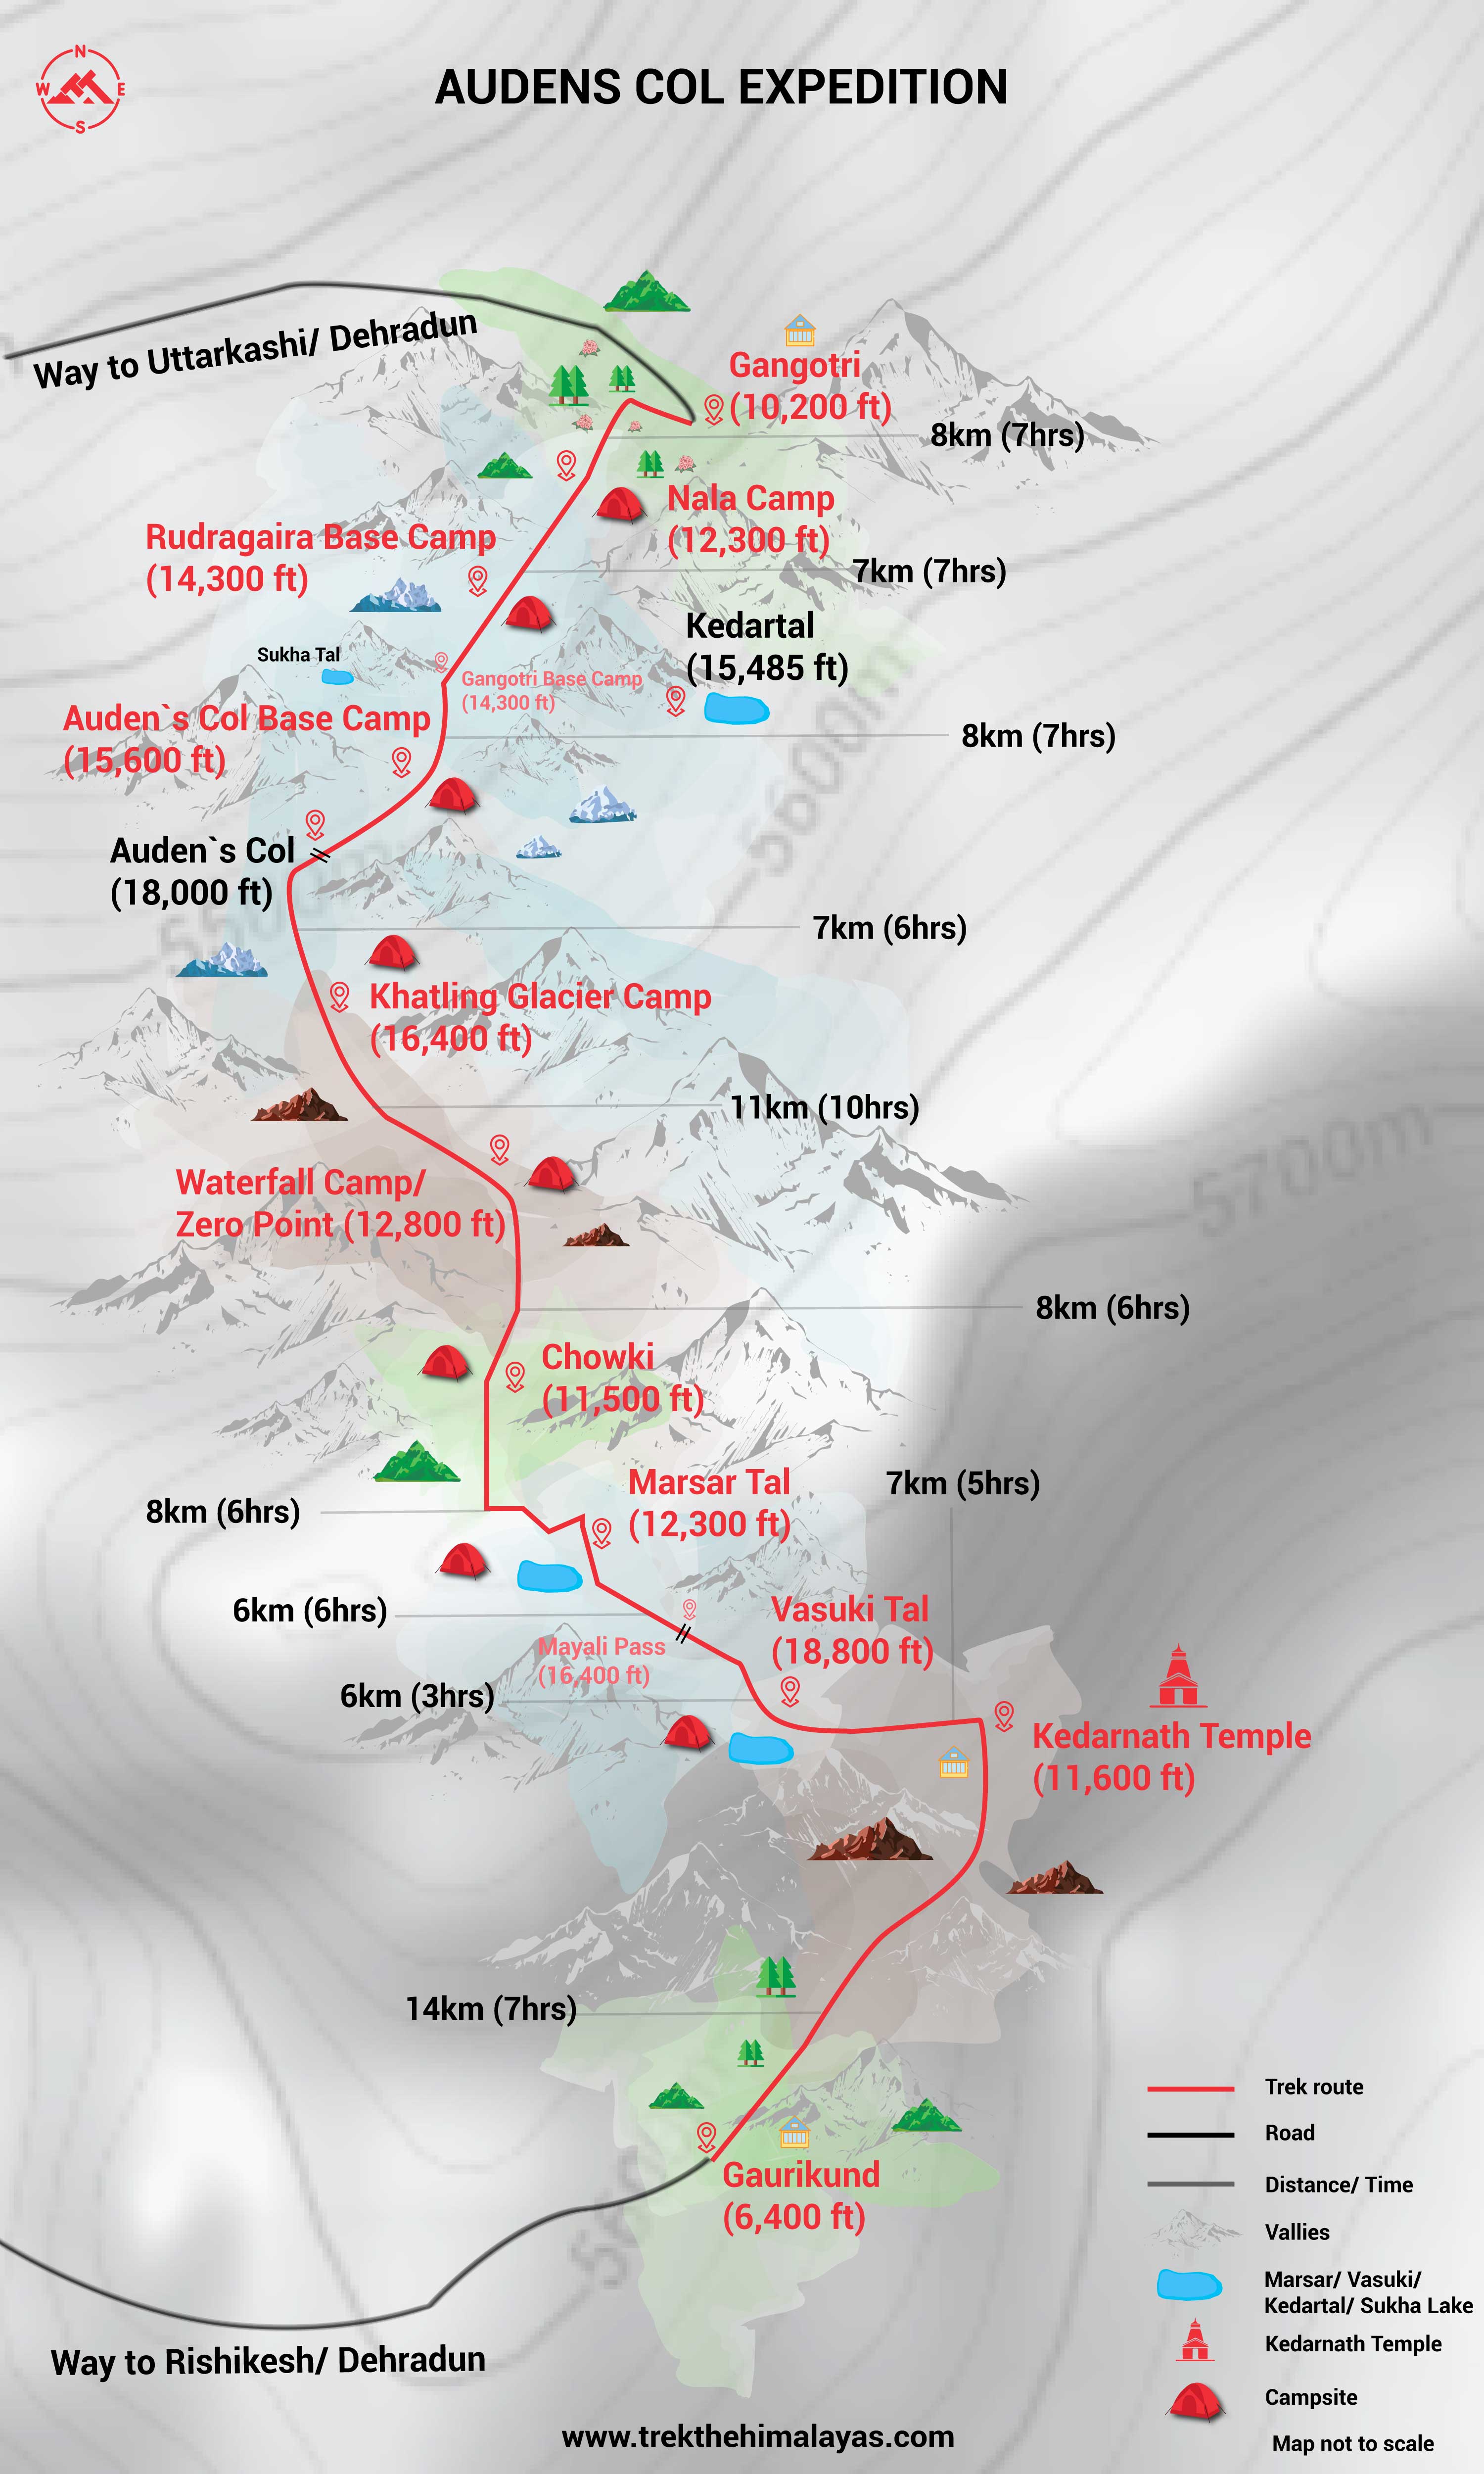 Auden's Col Expedition Maps